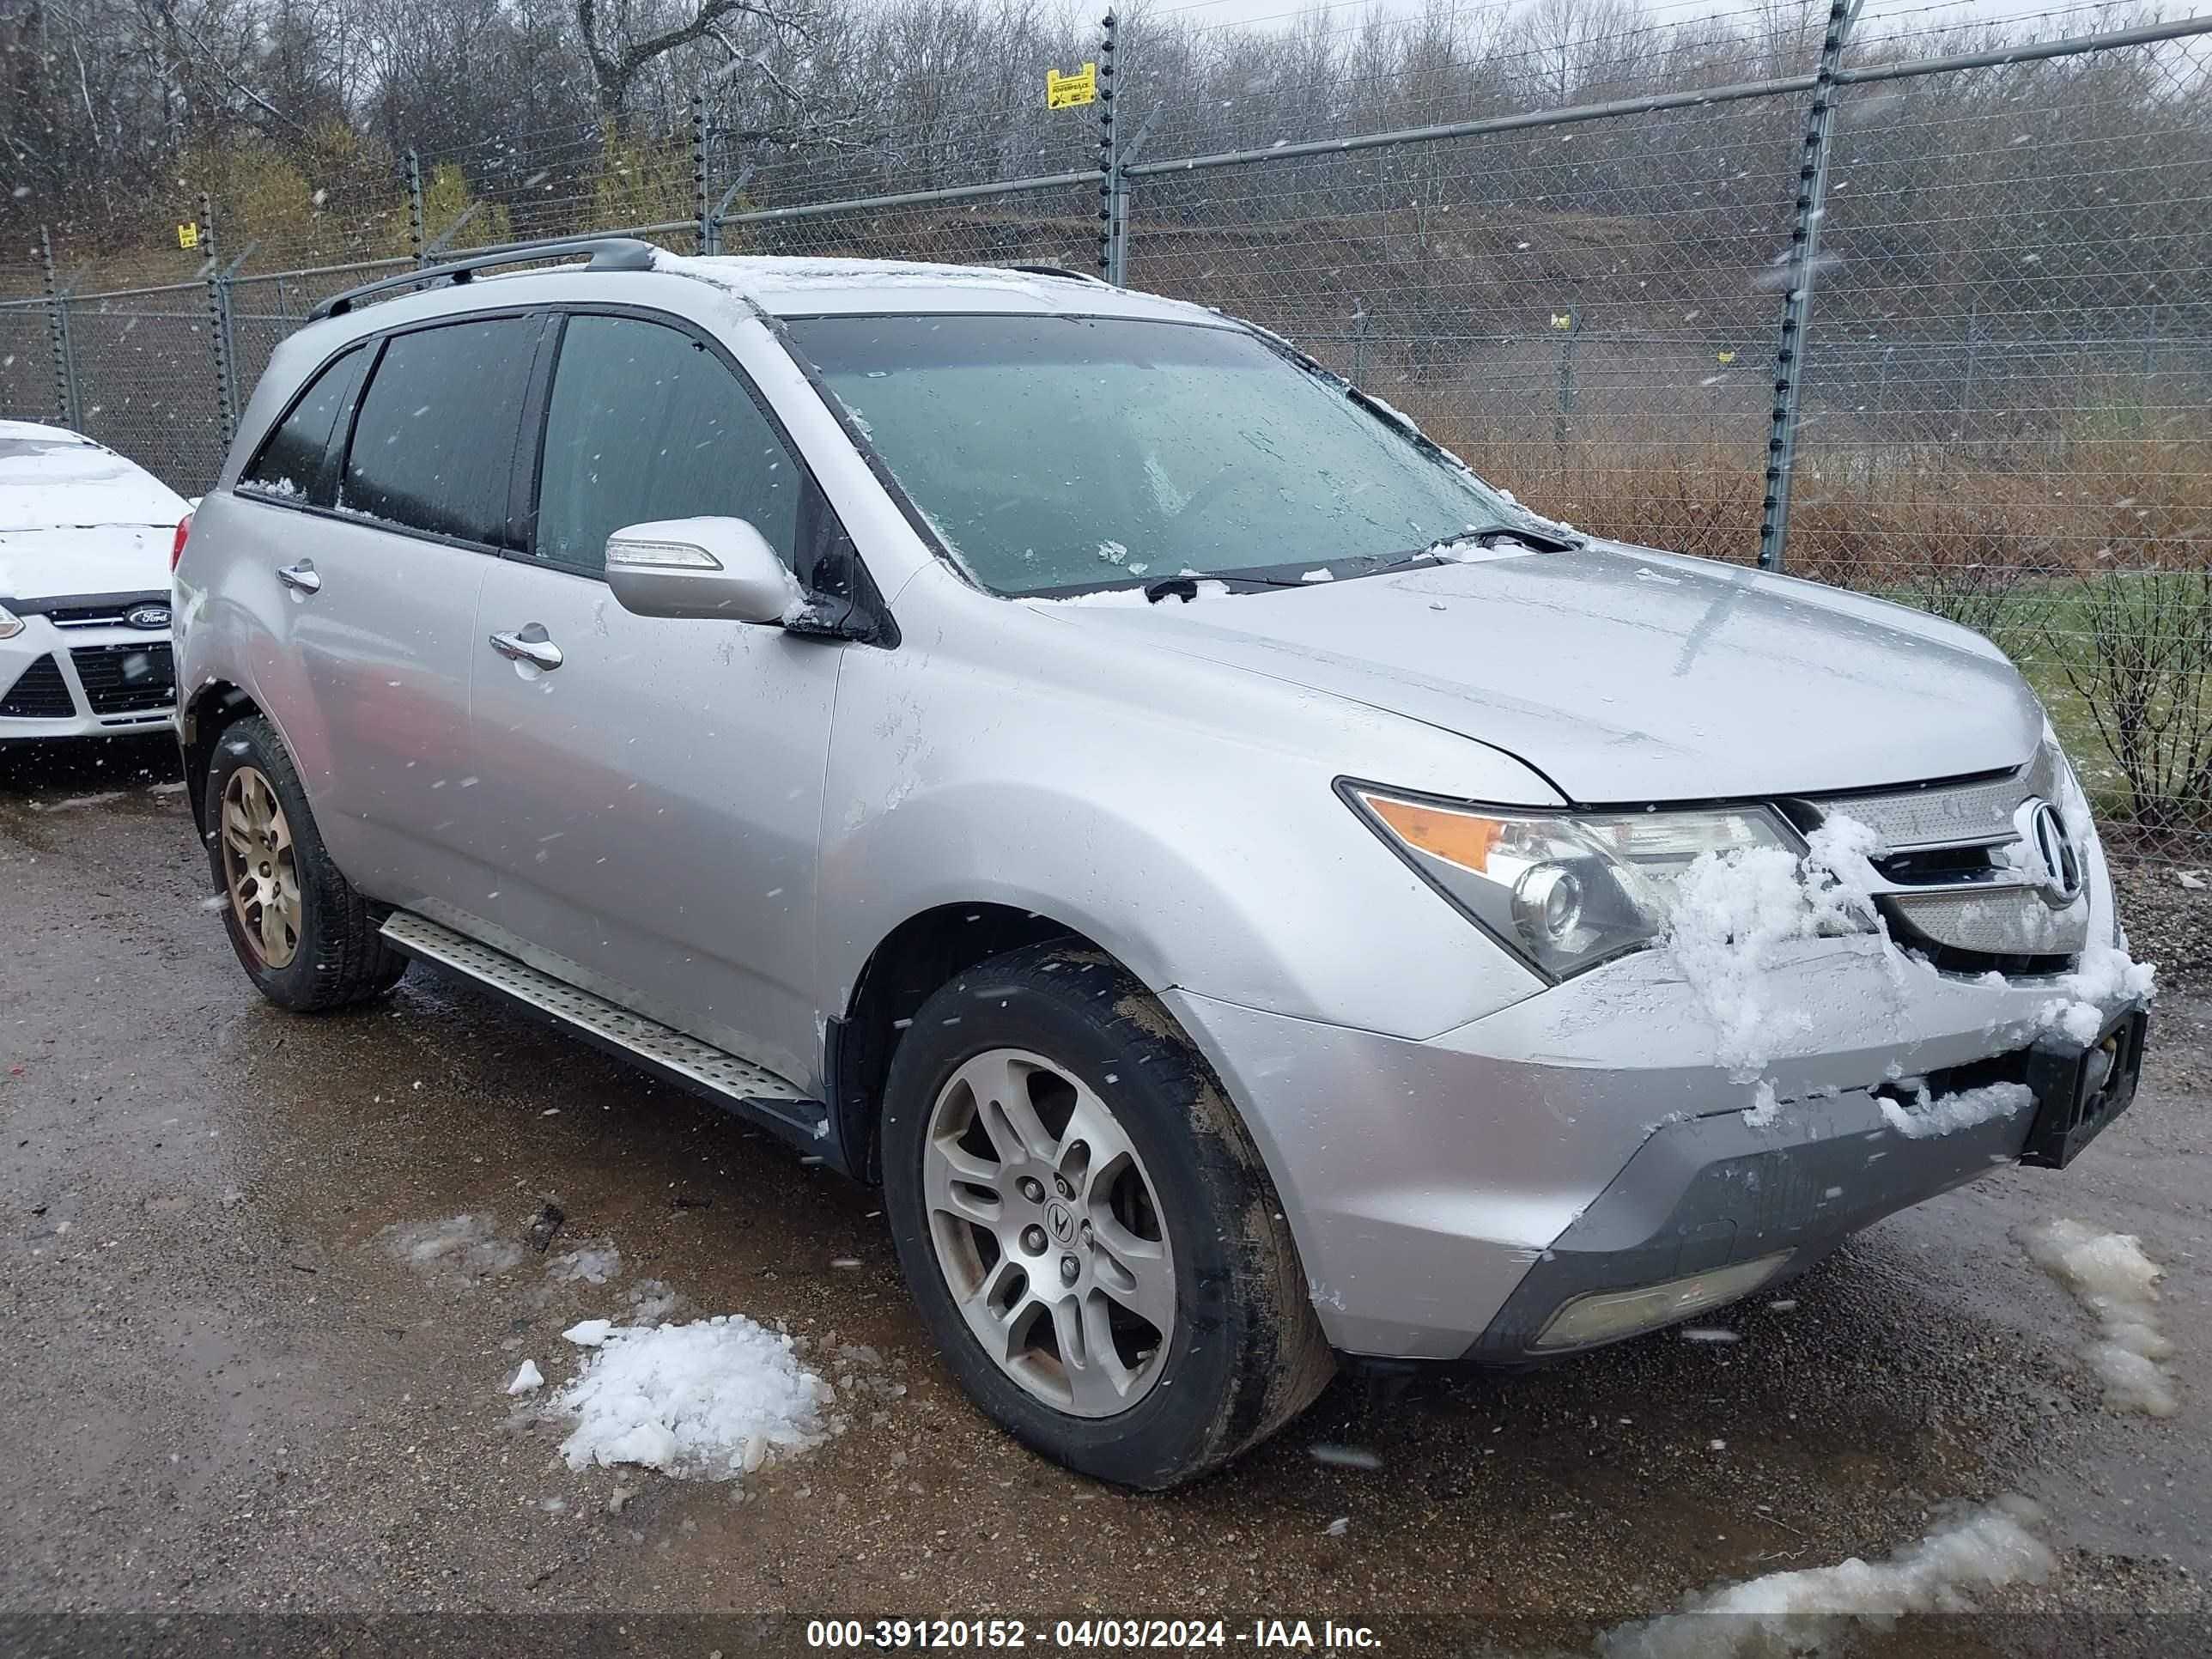 vin: 2HNYD28468H506184 2HNYD28468H506184 2008 acura mdx 3700 for Sale in 60118, 605 Healy Road, East Dundee, Illinois, USA